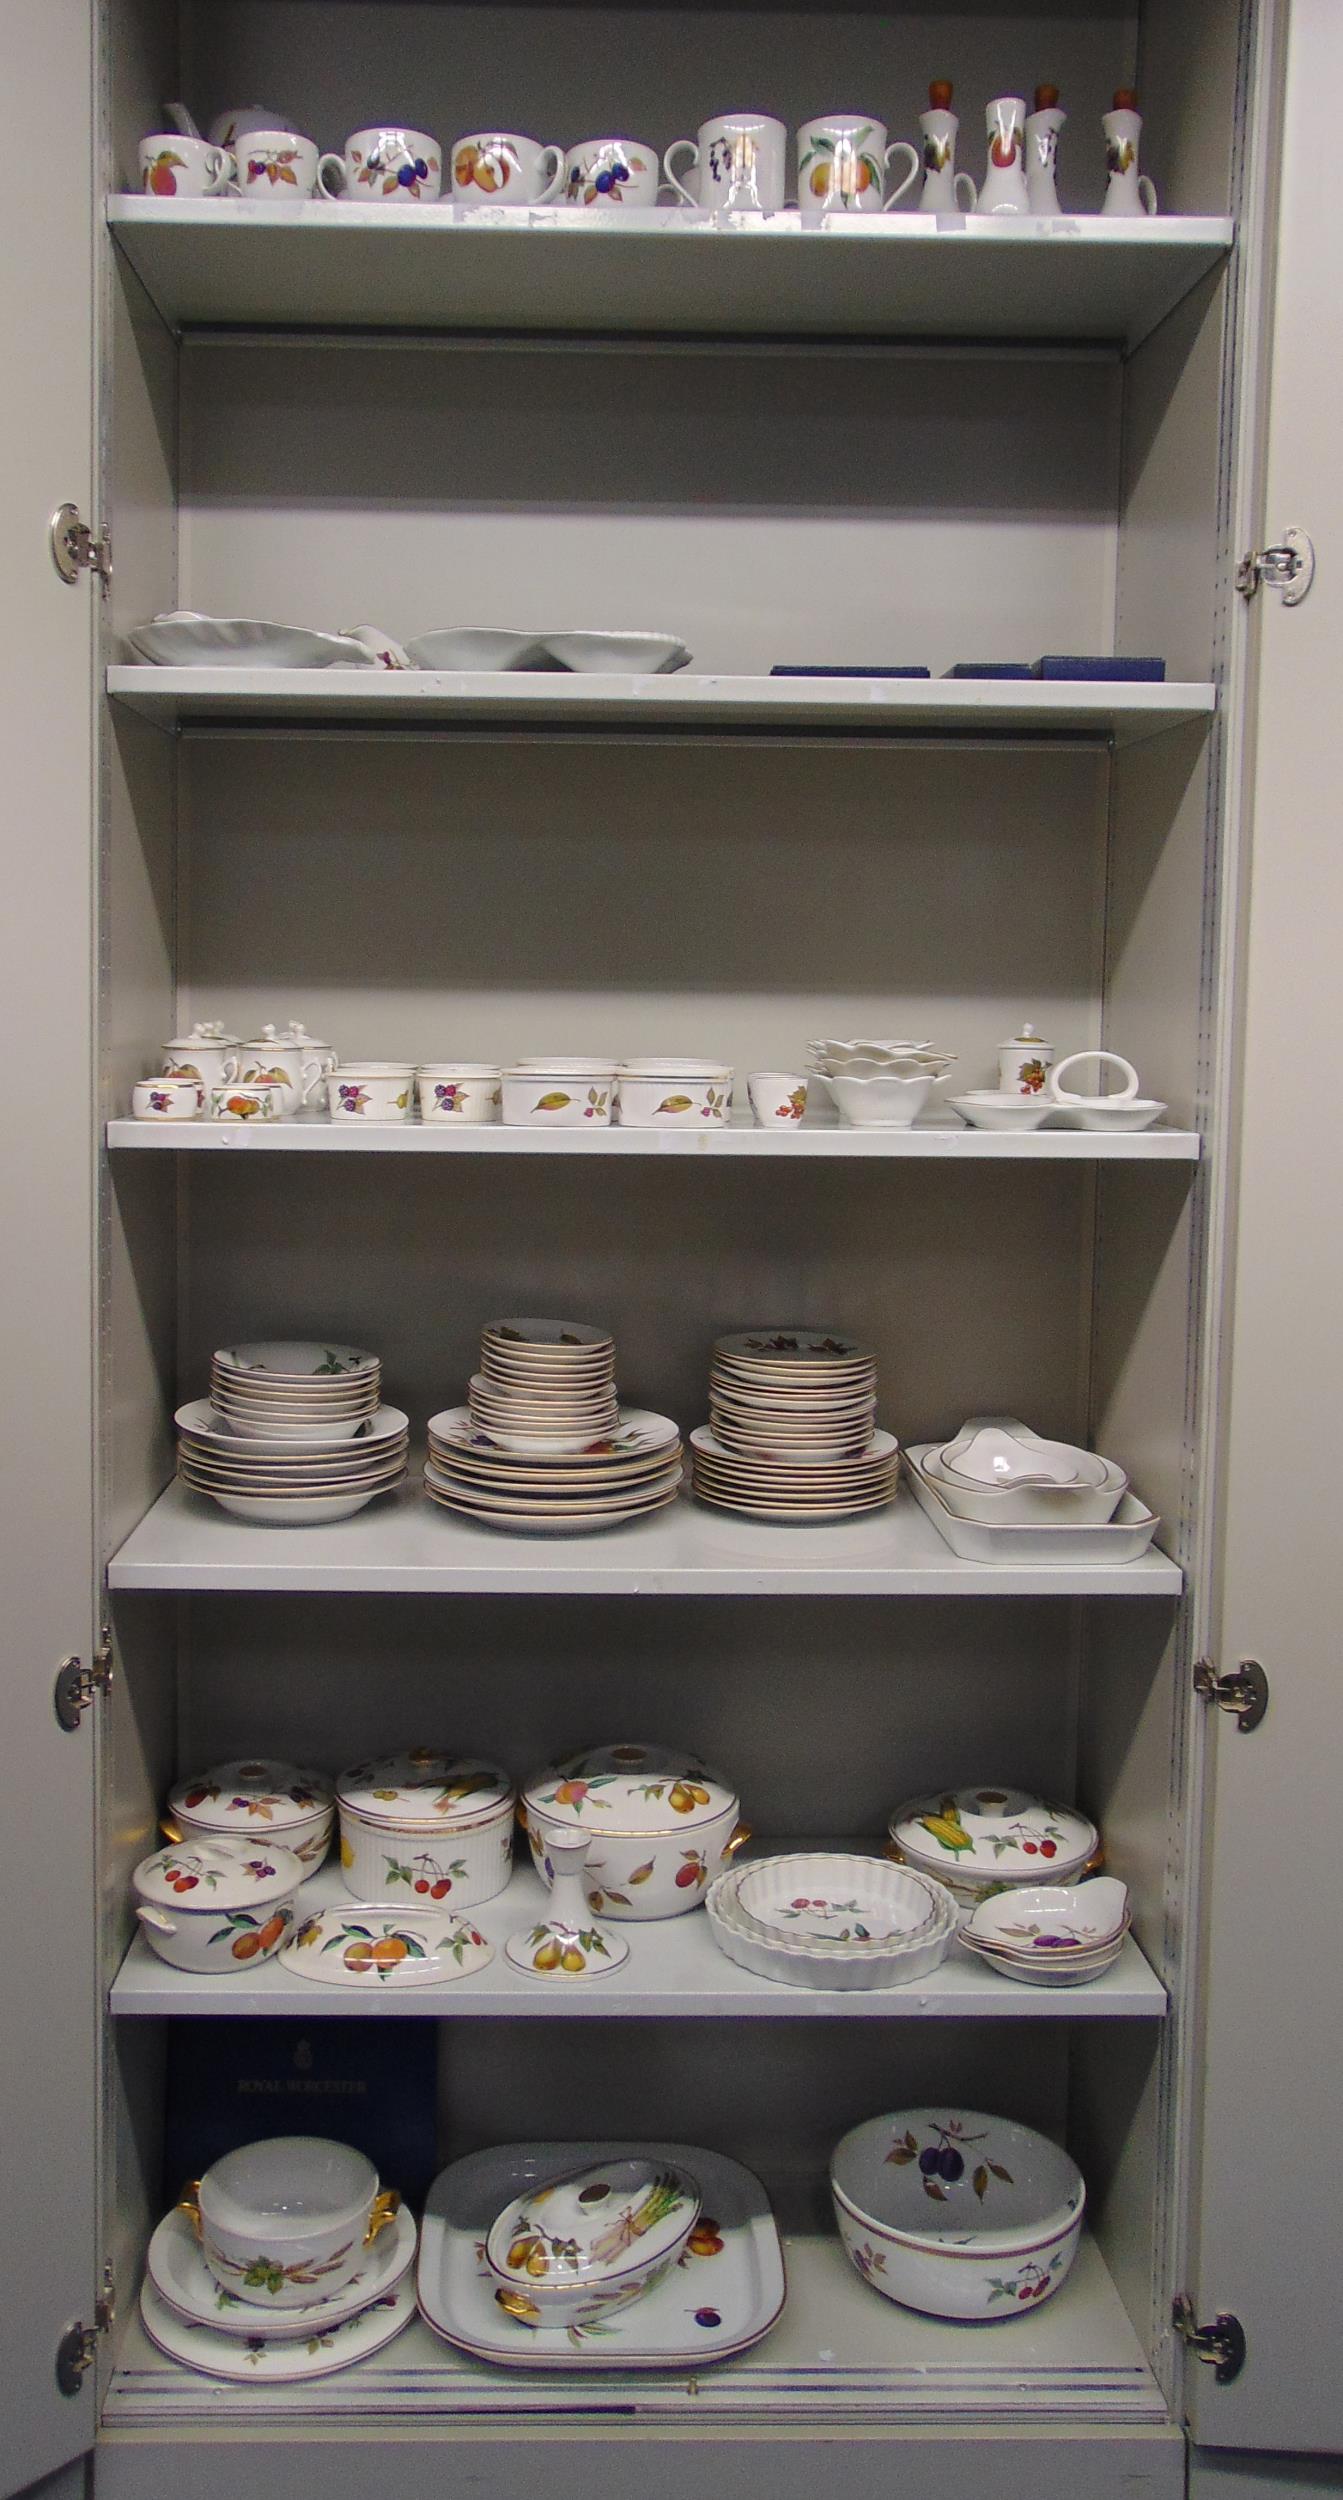 Royal Worcester Evesham pattern dinner, tea and coffee service to include plates, bowls, serving